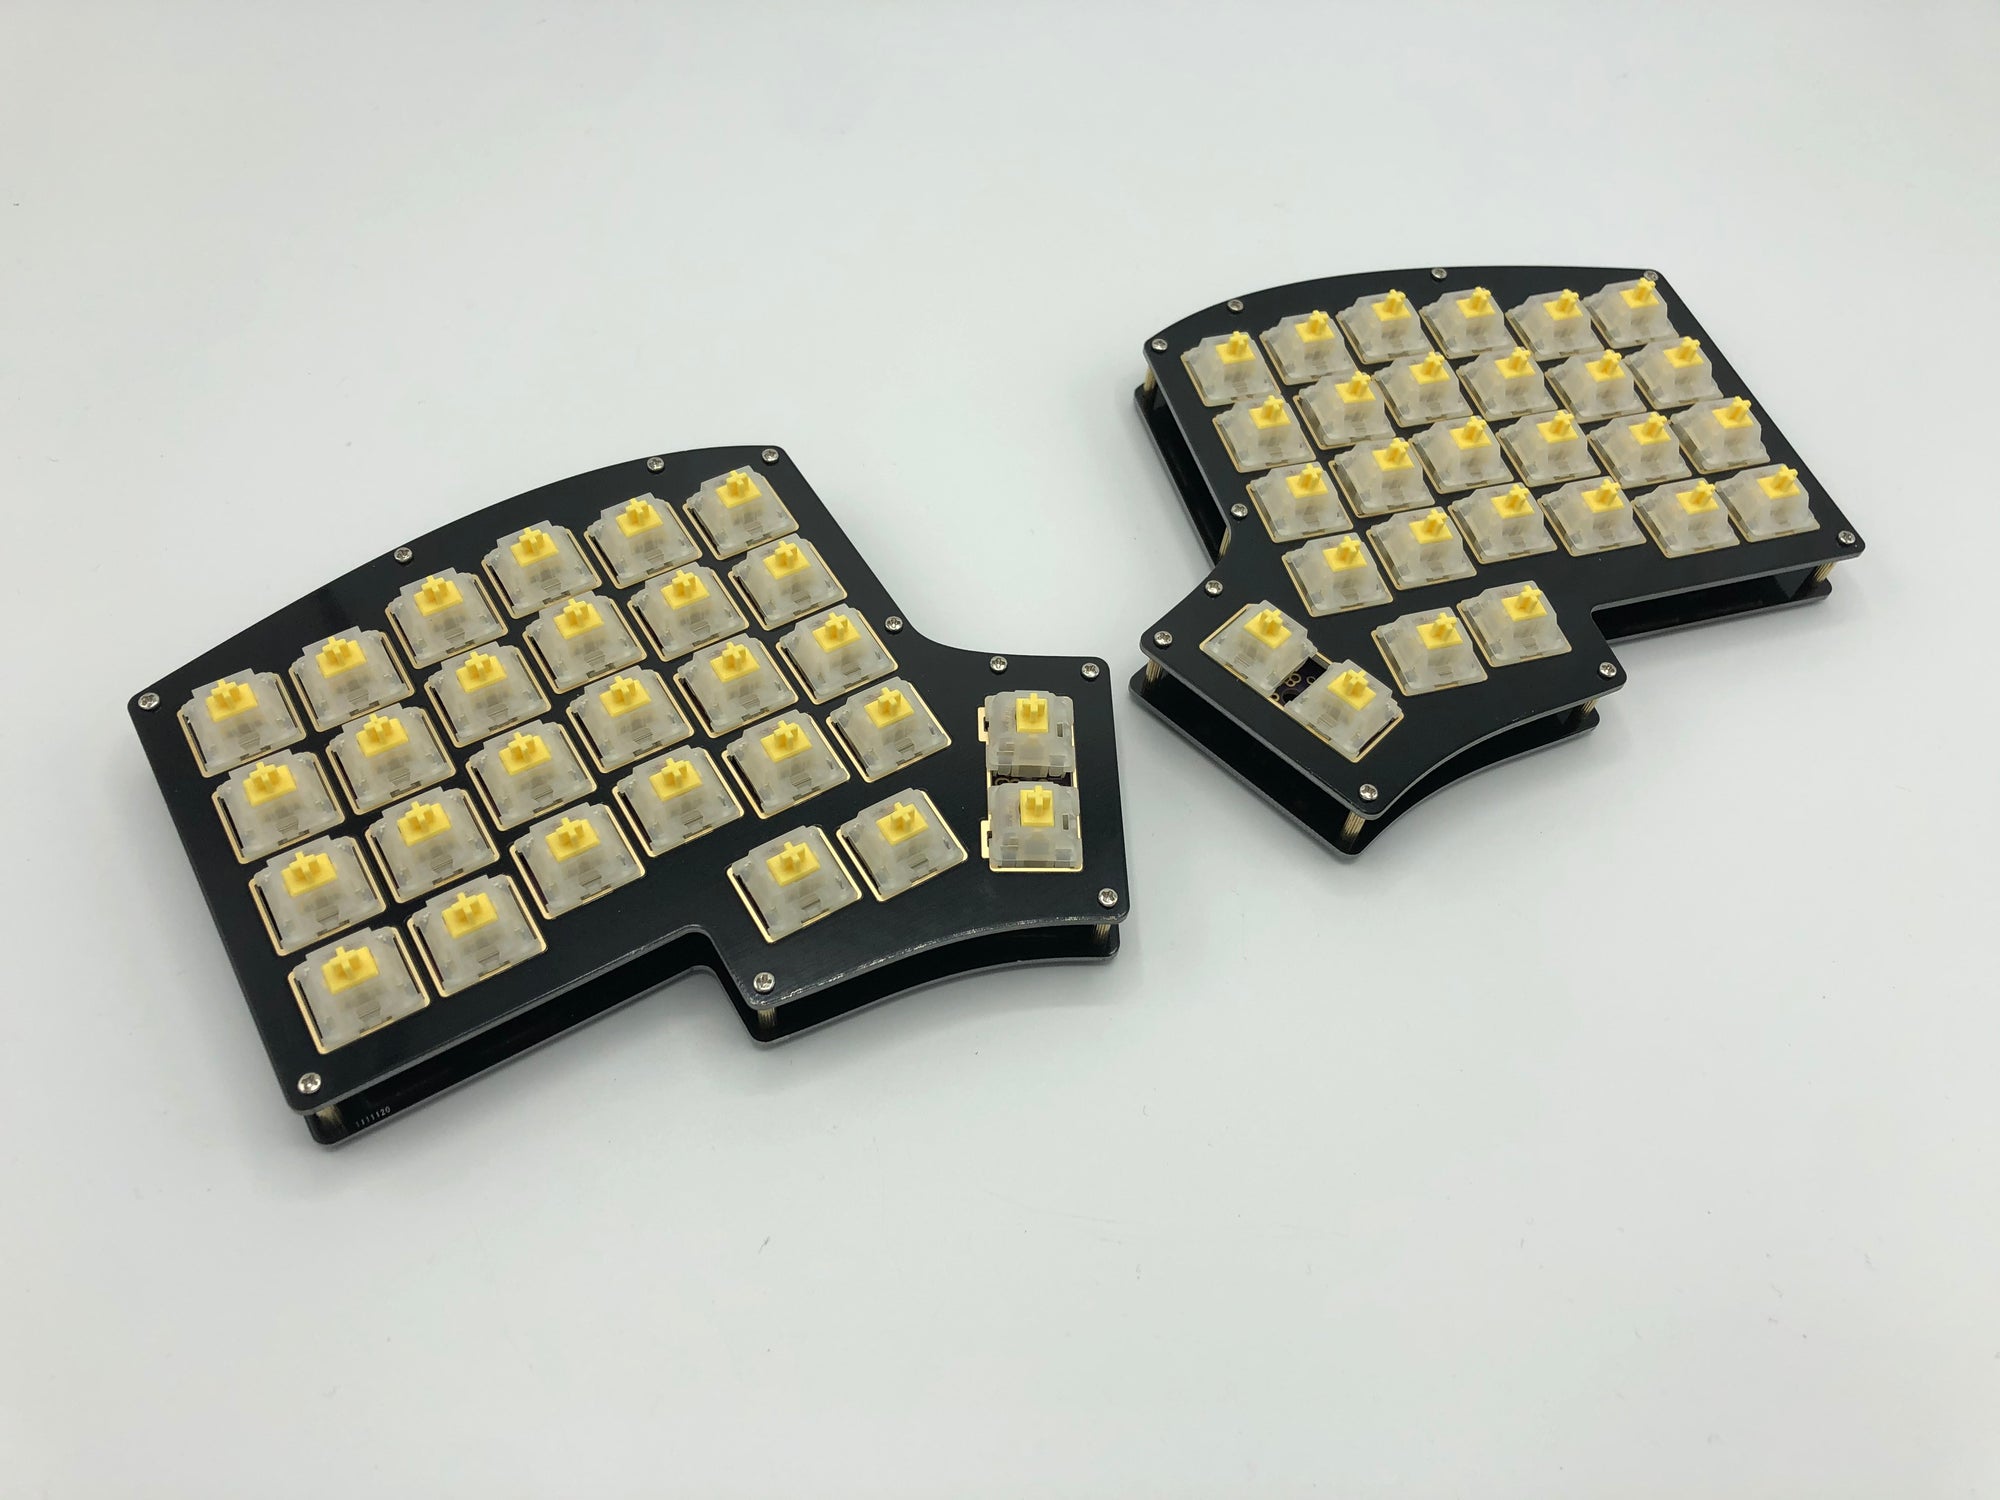 Iris keyboard built with black FR4 plates, Gateron yellow switches, and no keycaps.